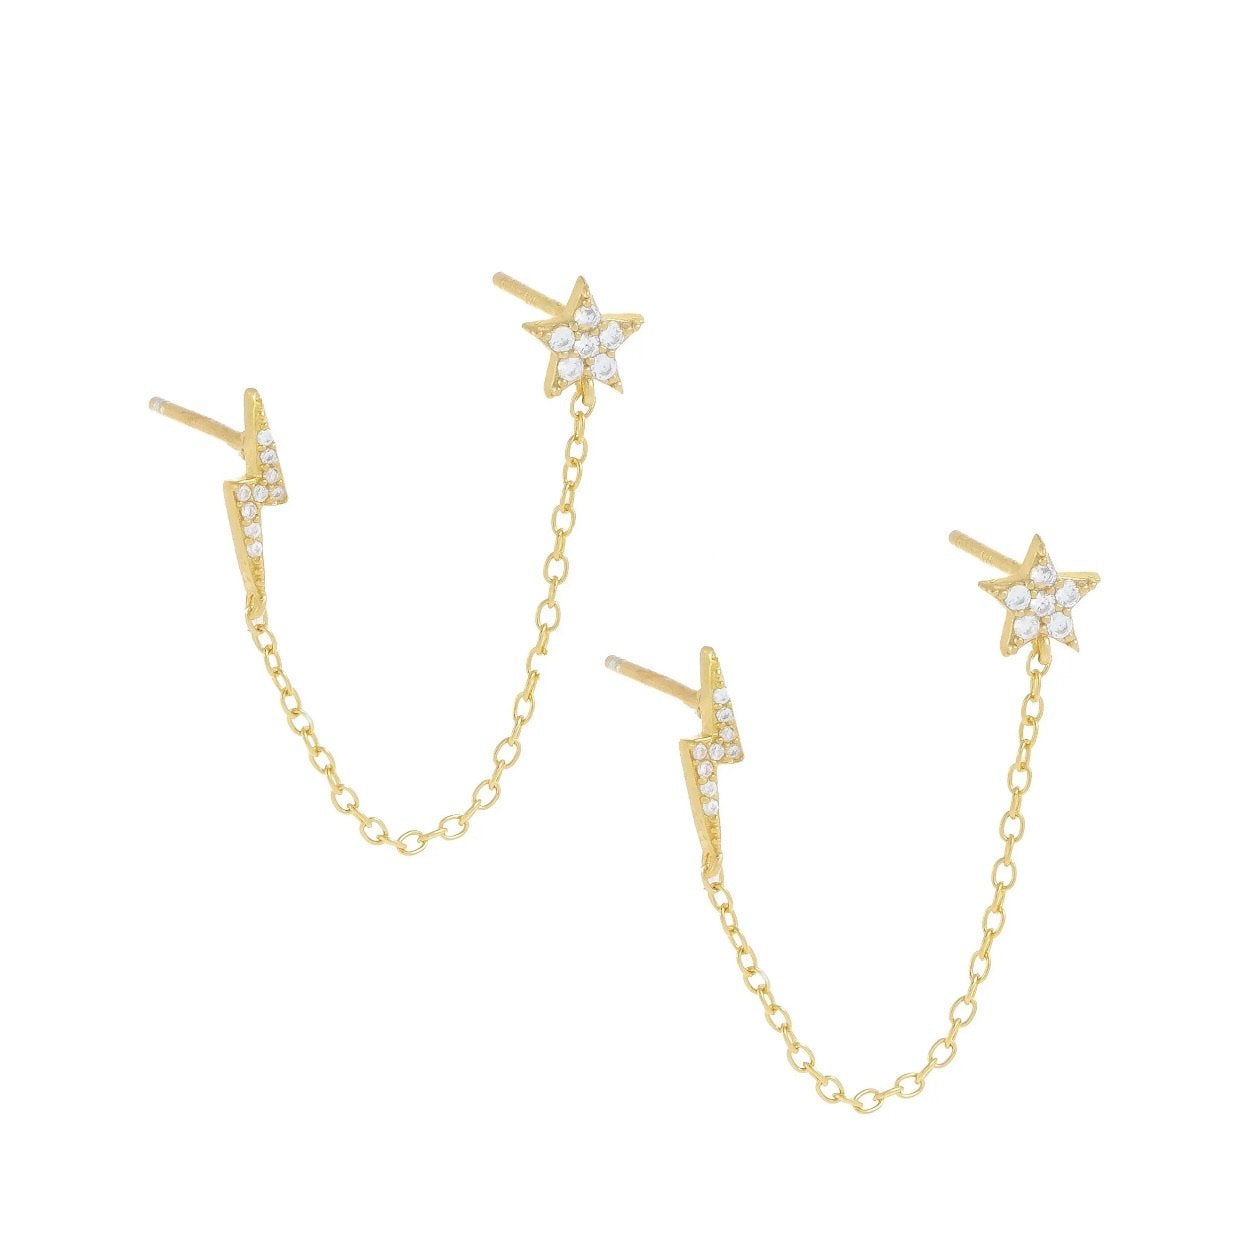 STAR AND LIGHTNING chain studs